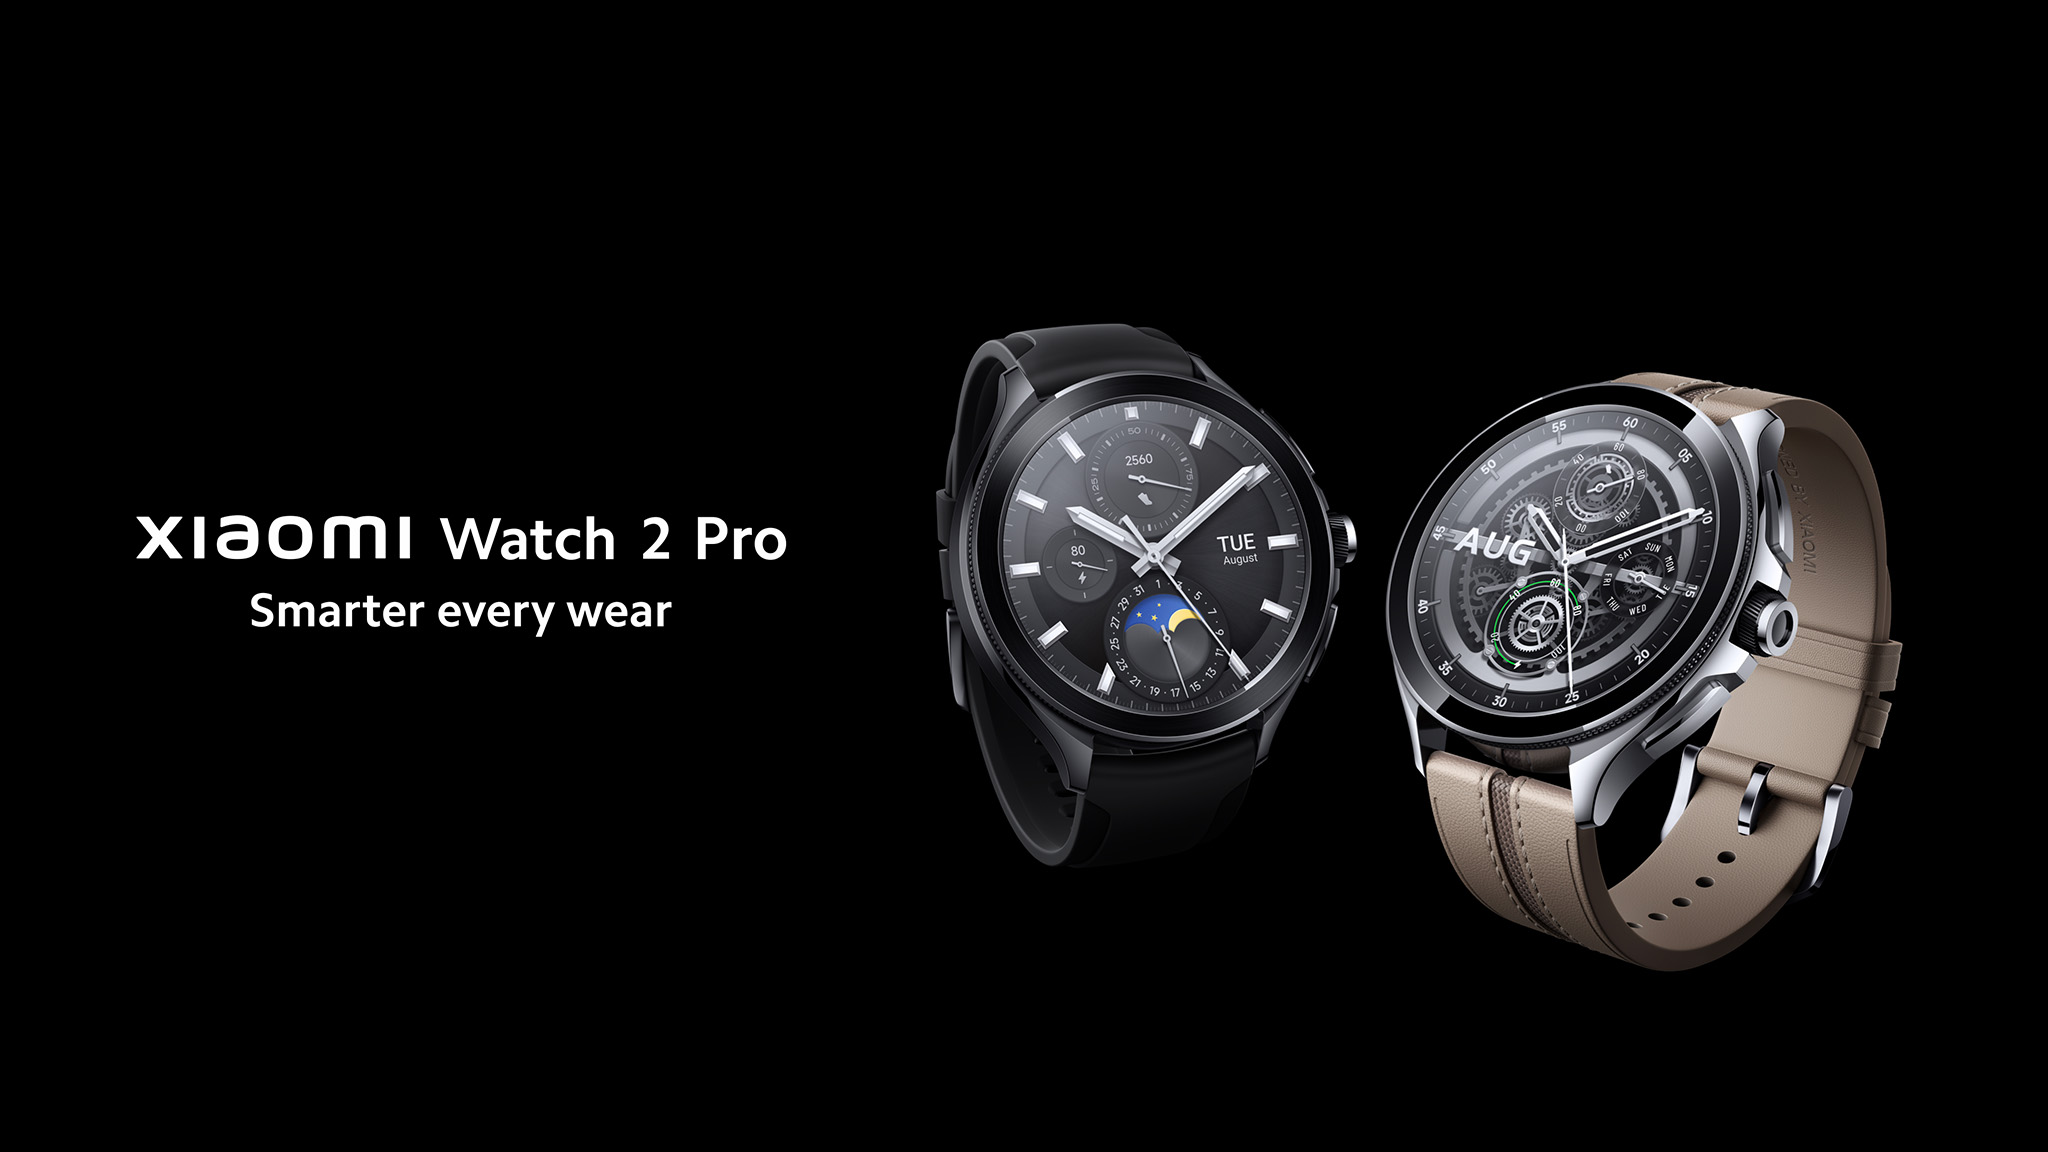 Xiaomi gives Wear OS another shot with the Watch 2 Pro